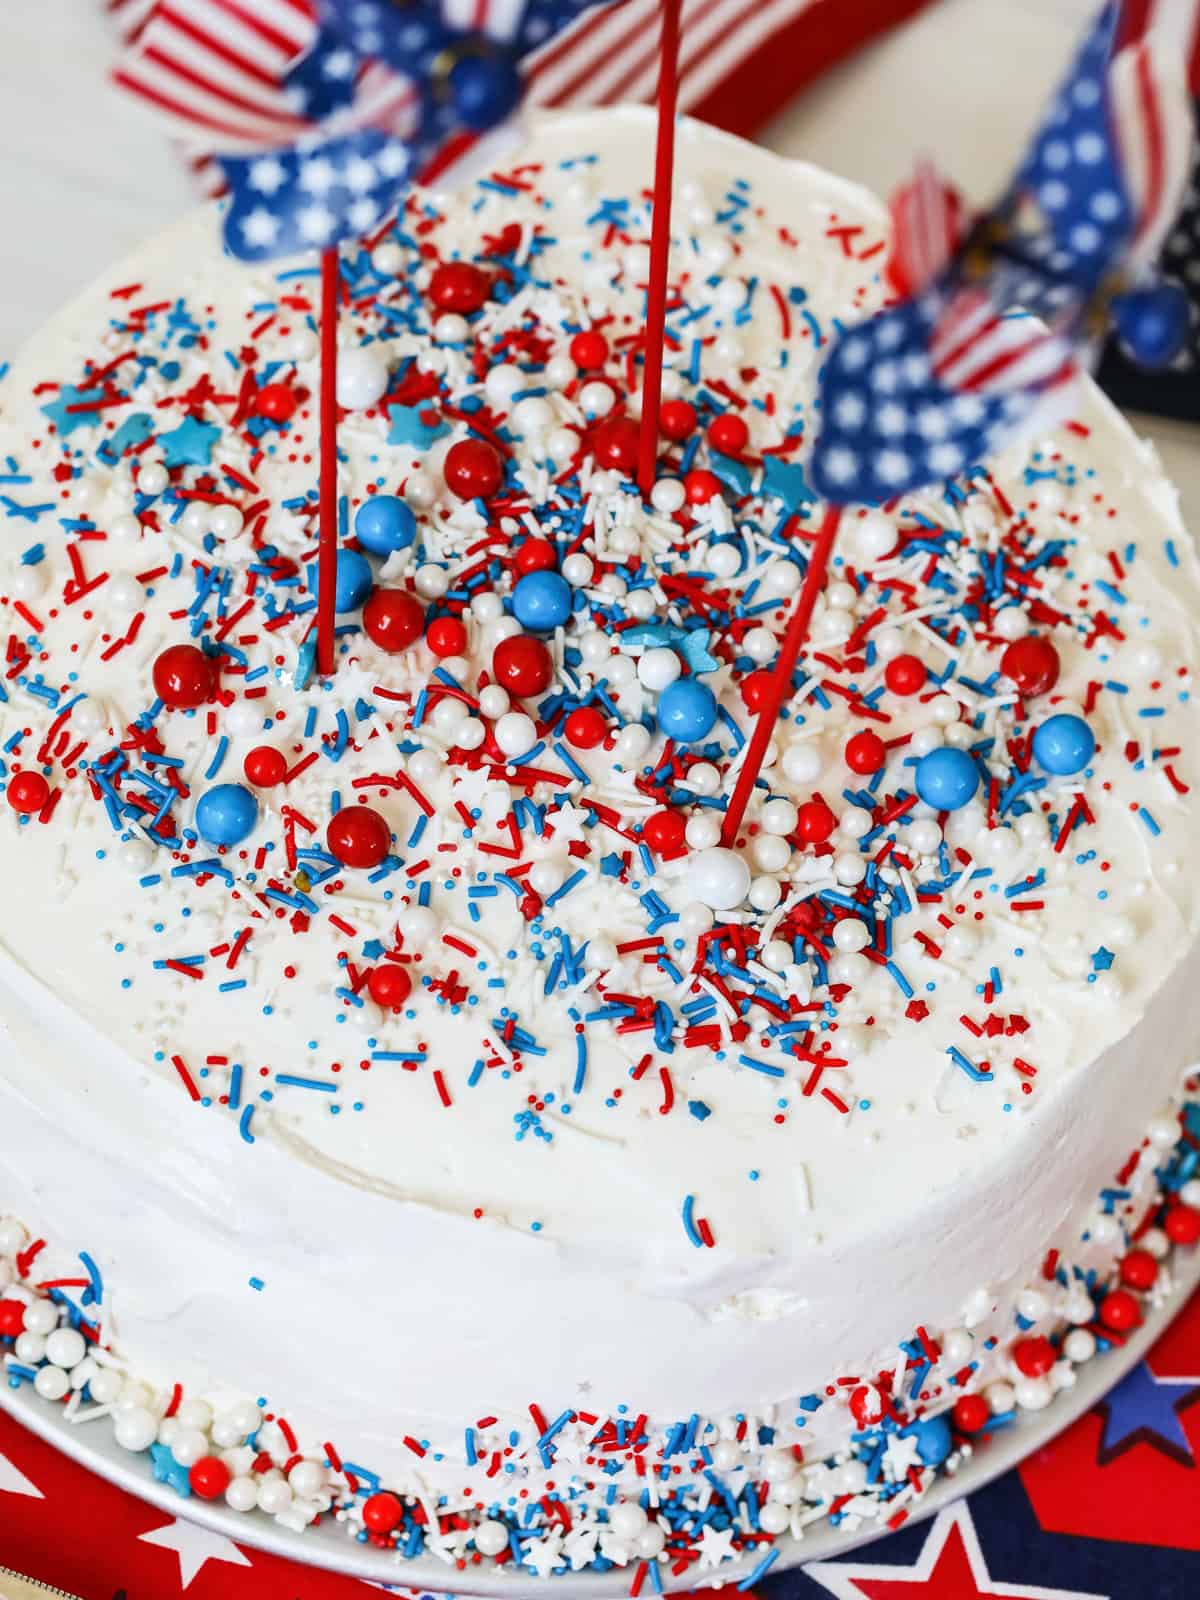 A white round ice cream cake with red white and blue sprinkles and pinwheels.